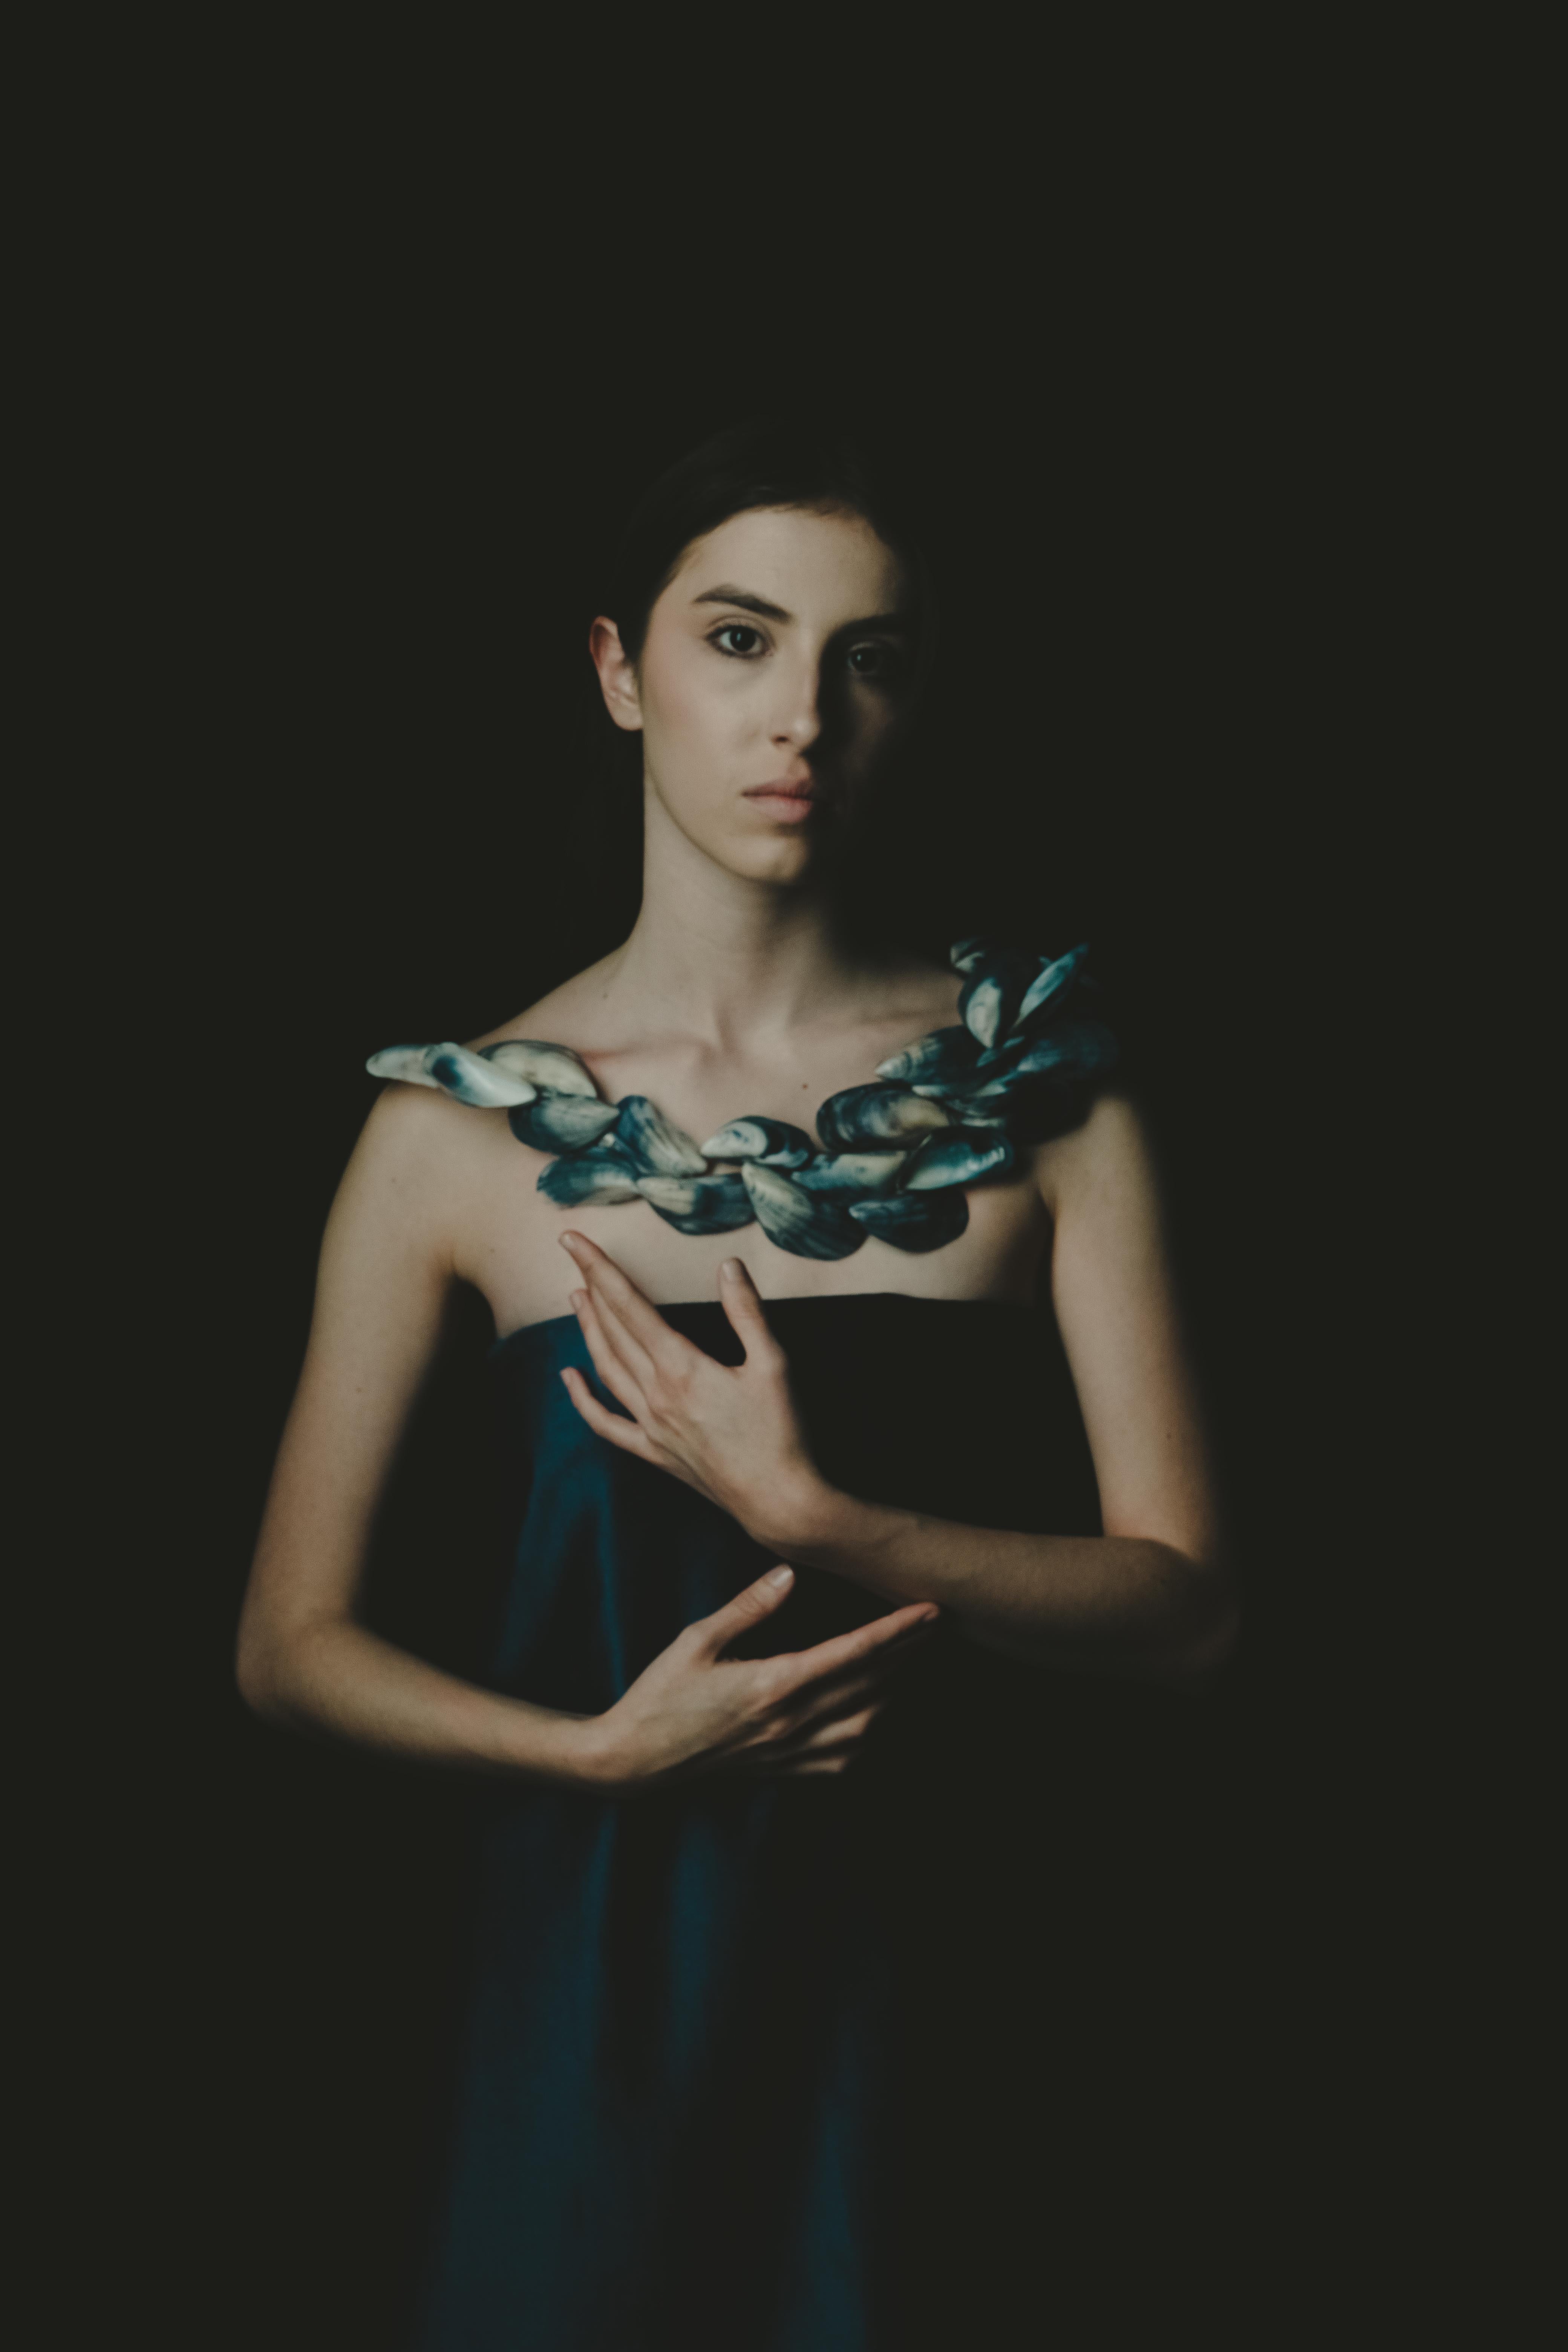 Edition of 1 of 5


 The stunning fine art portraits by fine art photographer Laurentina Miksys have been described as opulent, timeless, and emotionally expressive. When they have a soul, images allow our sensitivity to engage with the subject and